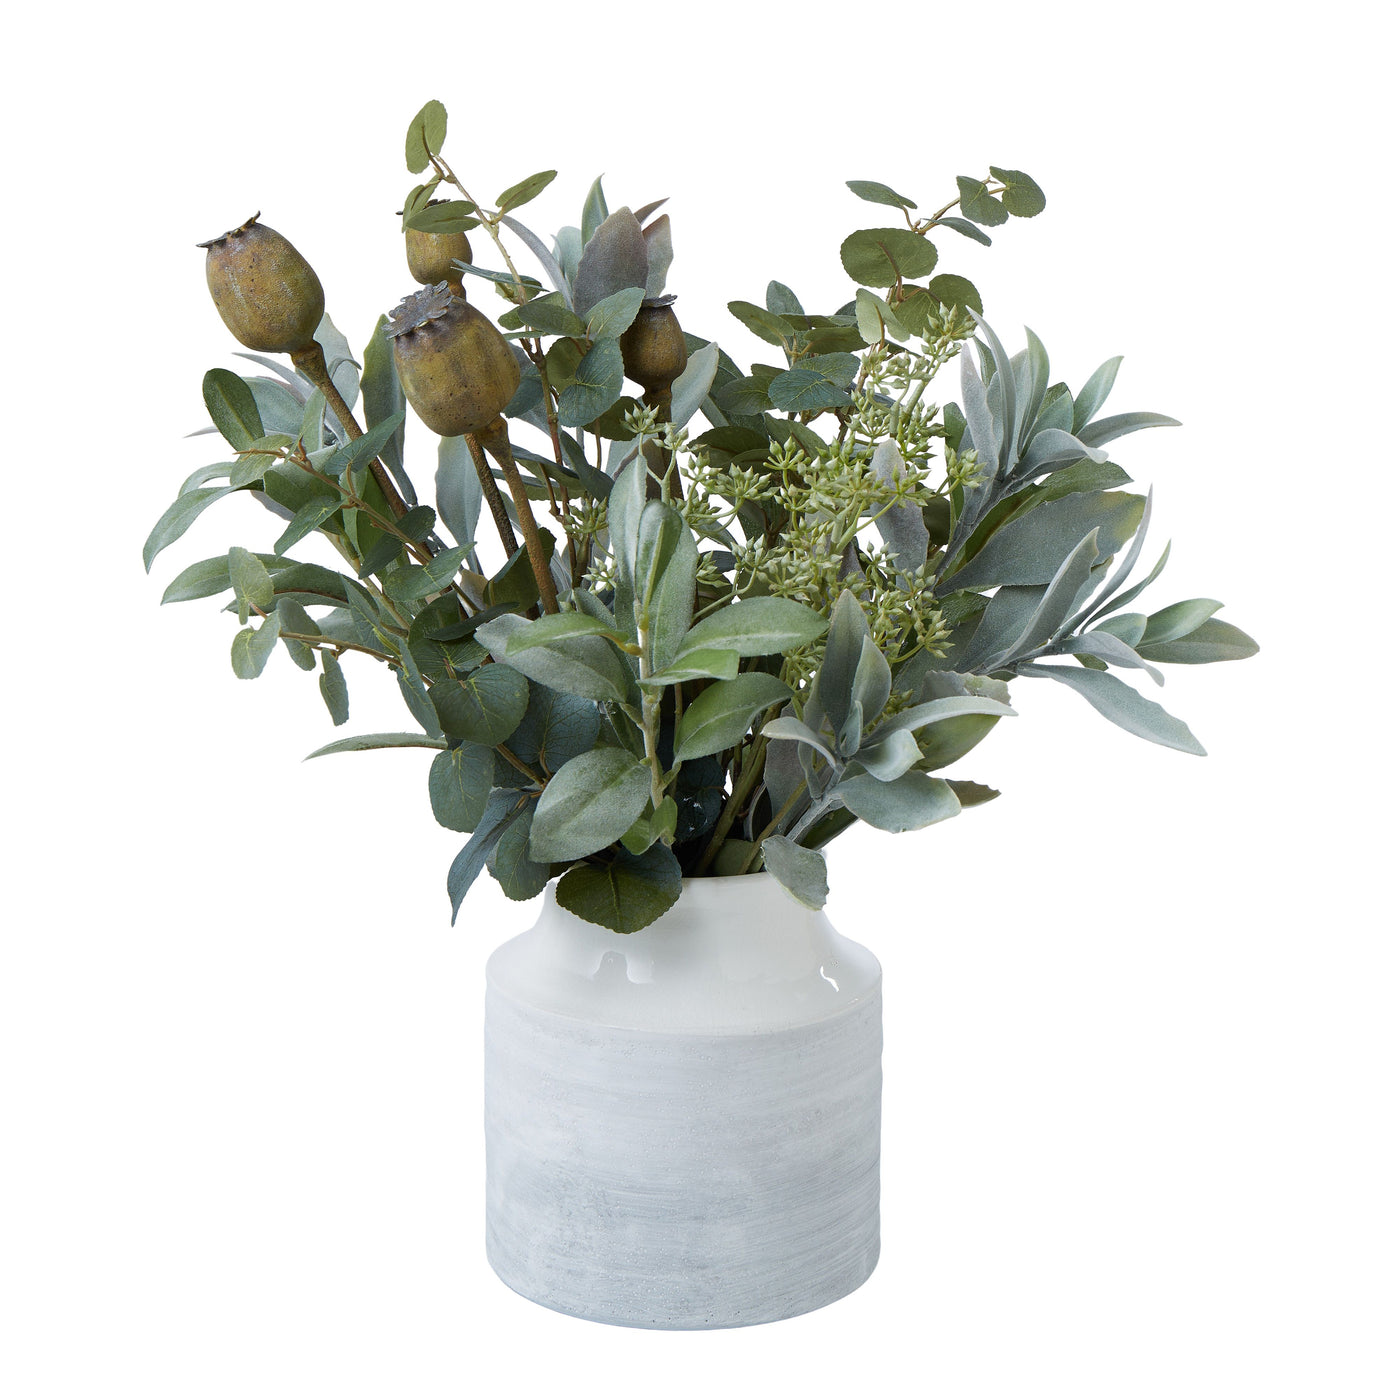 Foliage Mix in Ryder Vessel